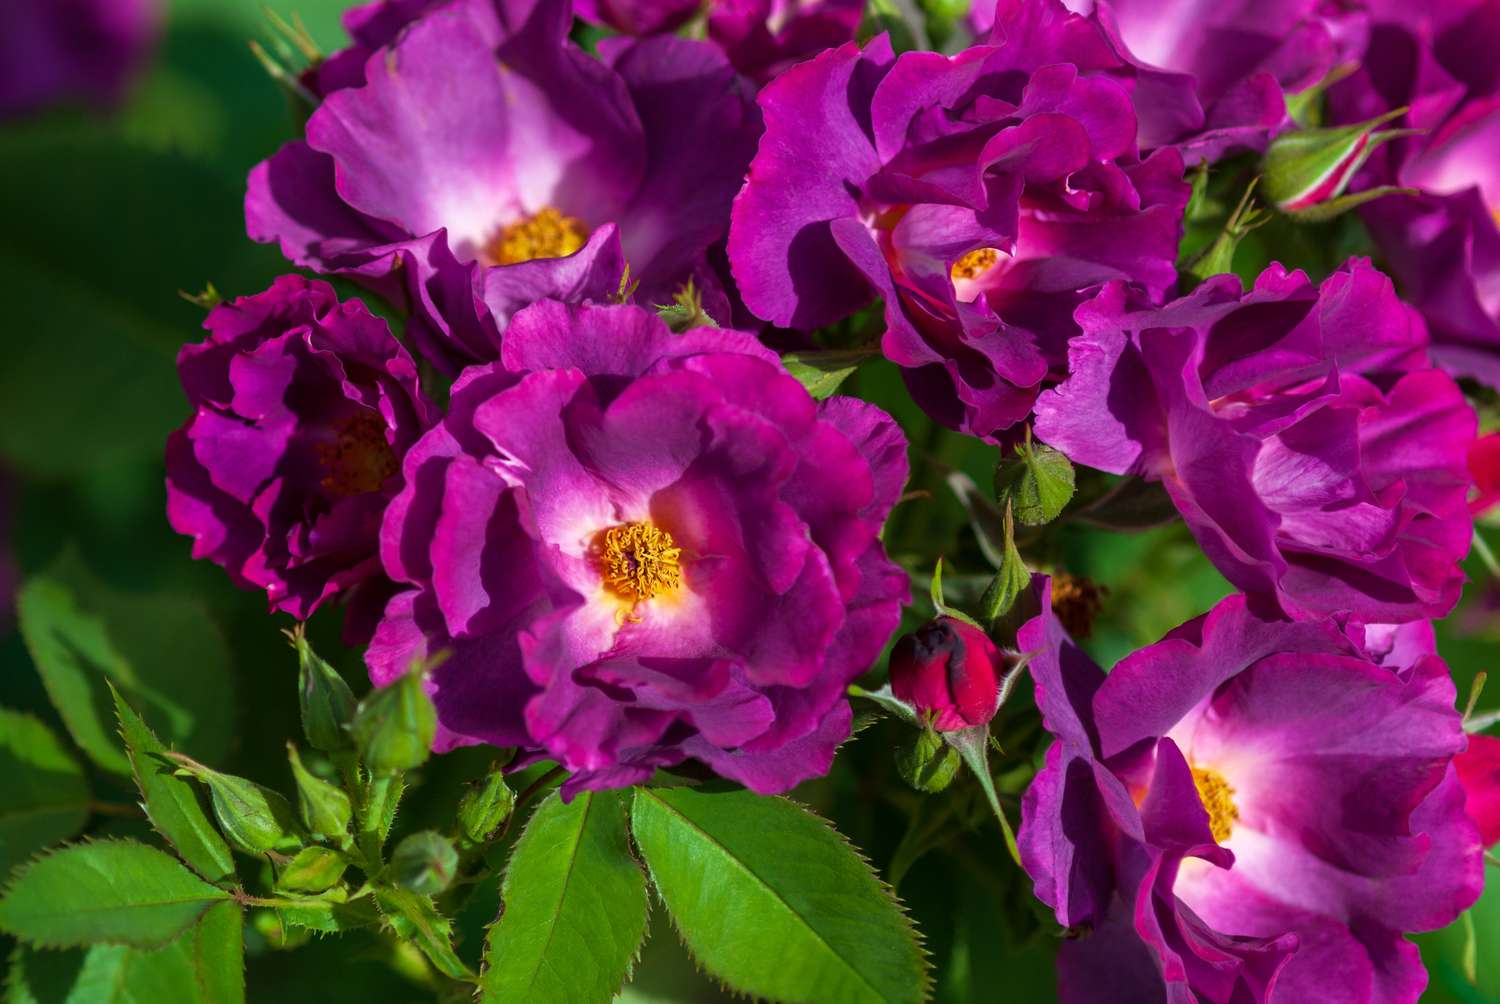 Rhapsody in blue rose plant with vivid purple and ruffled flowers in sunlight closeup